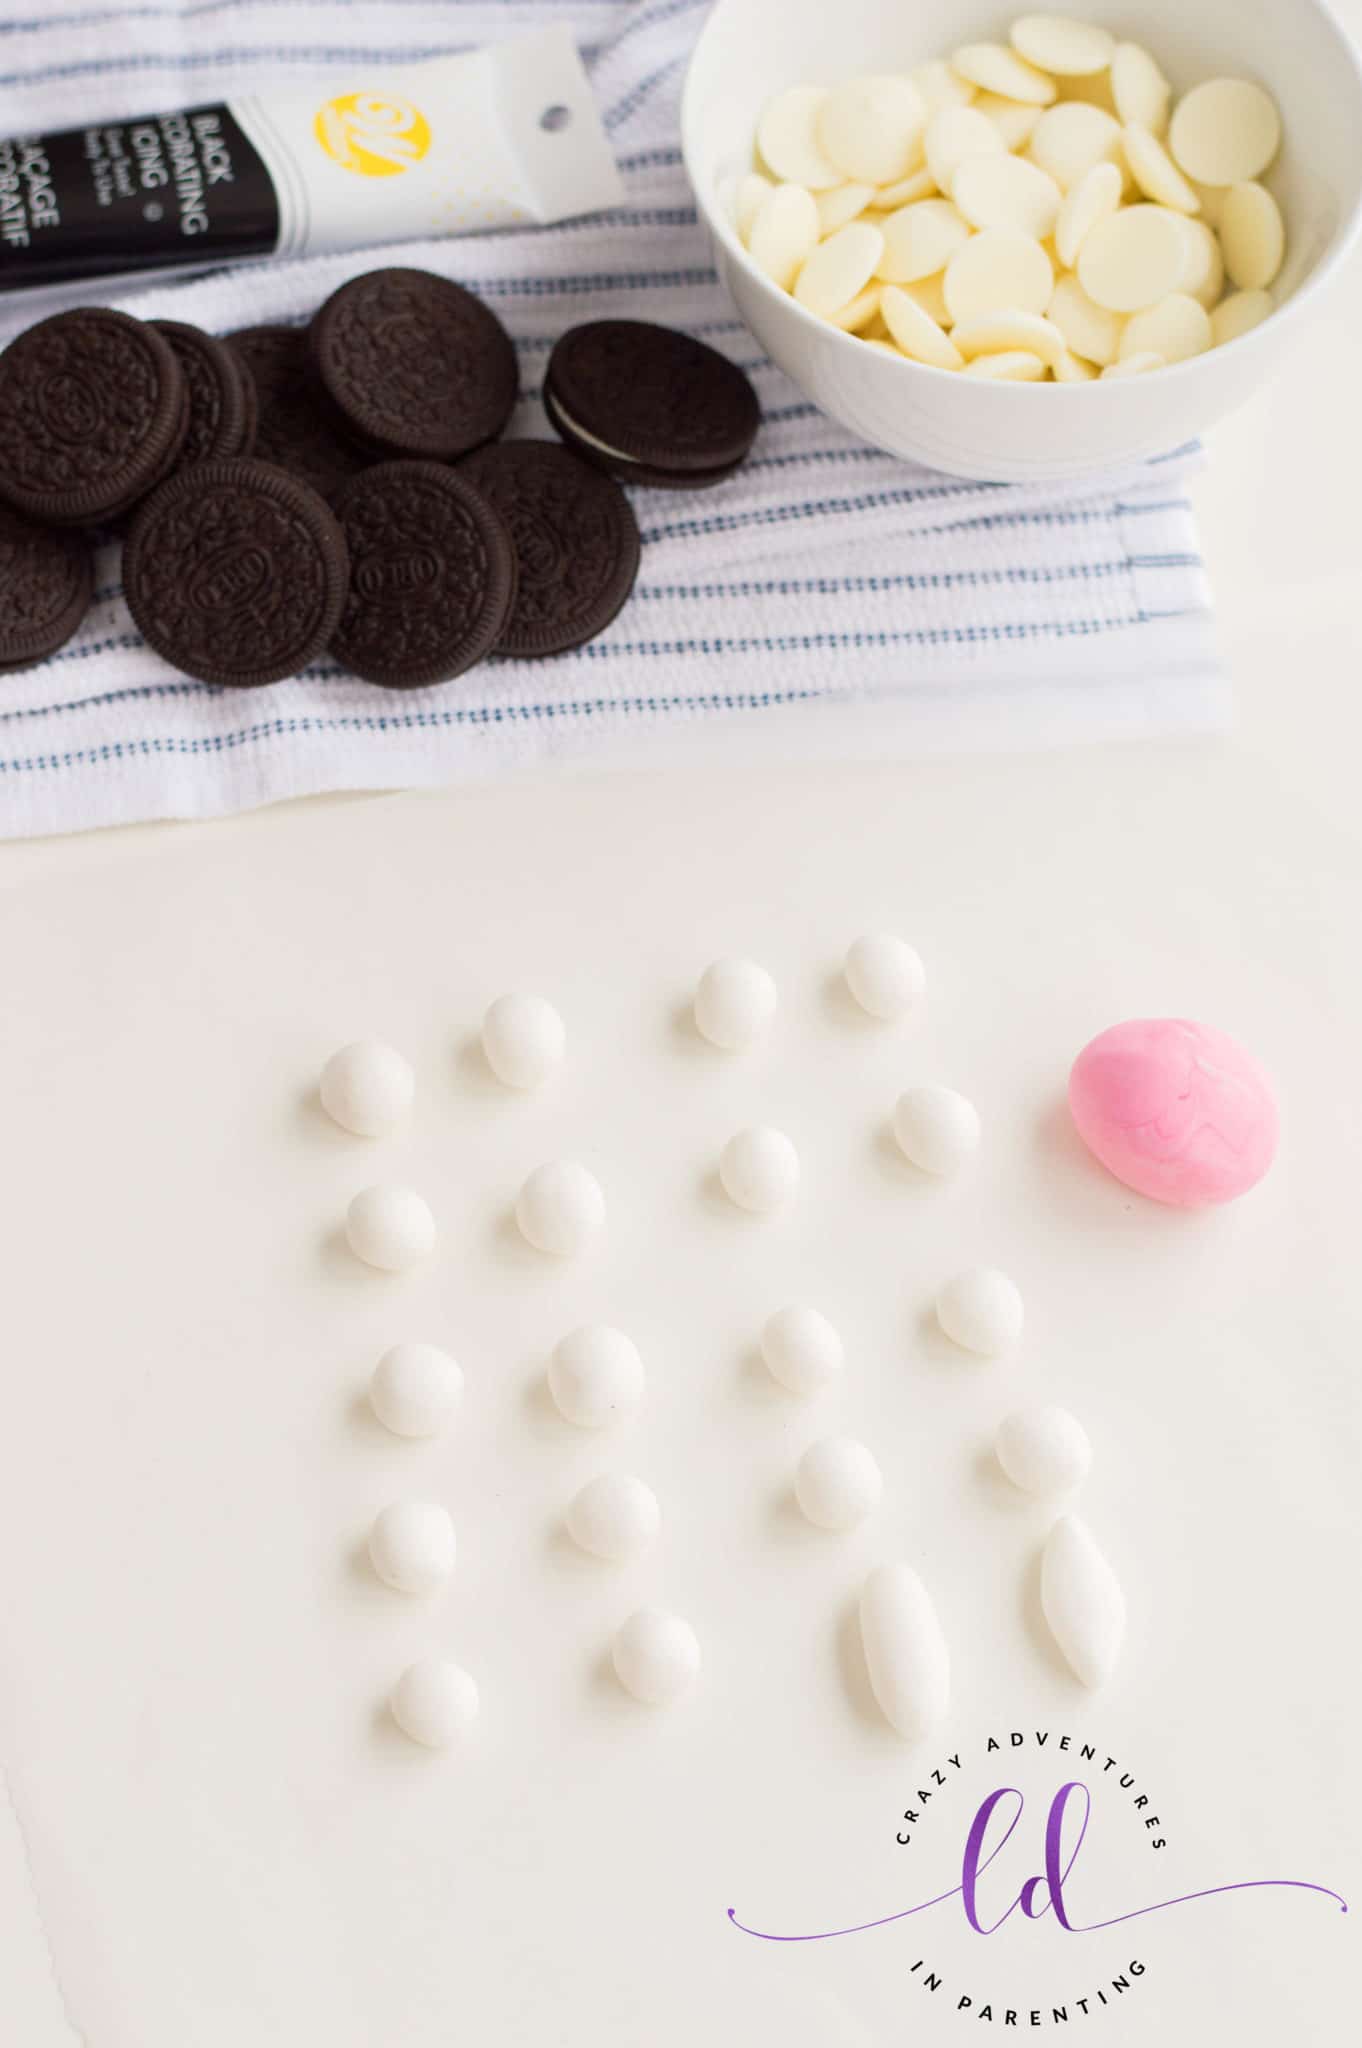 Roll Out White Fondant for Bunny Oreo Cookies